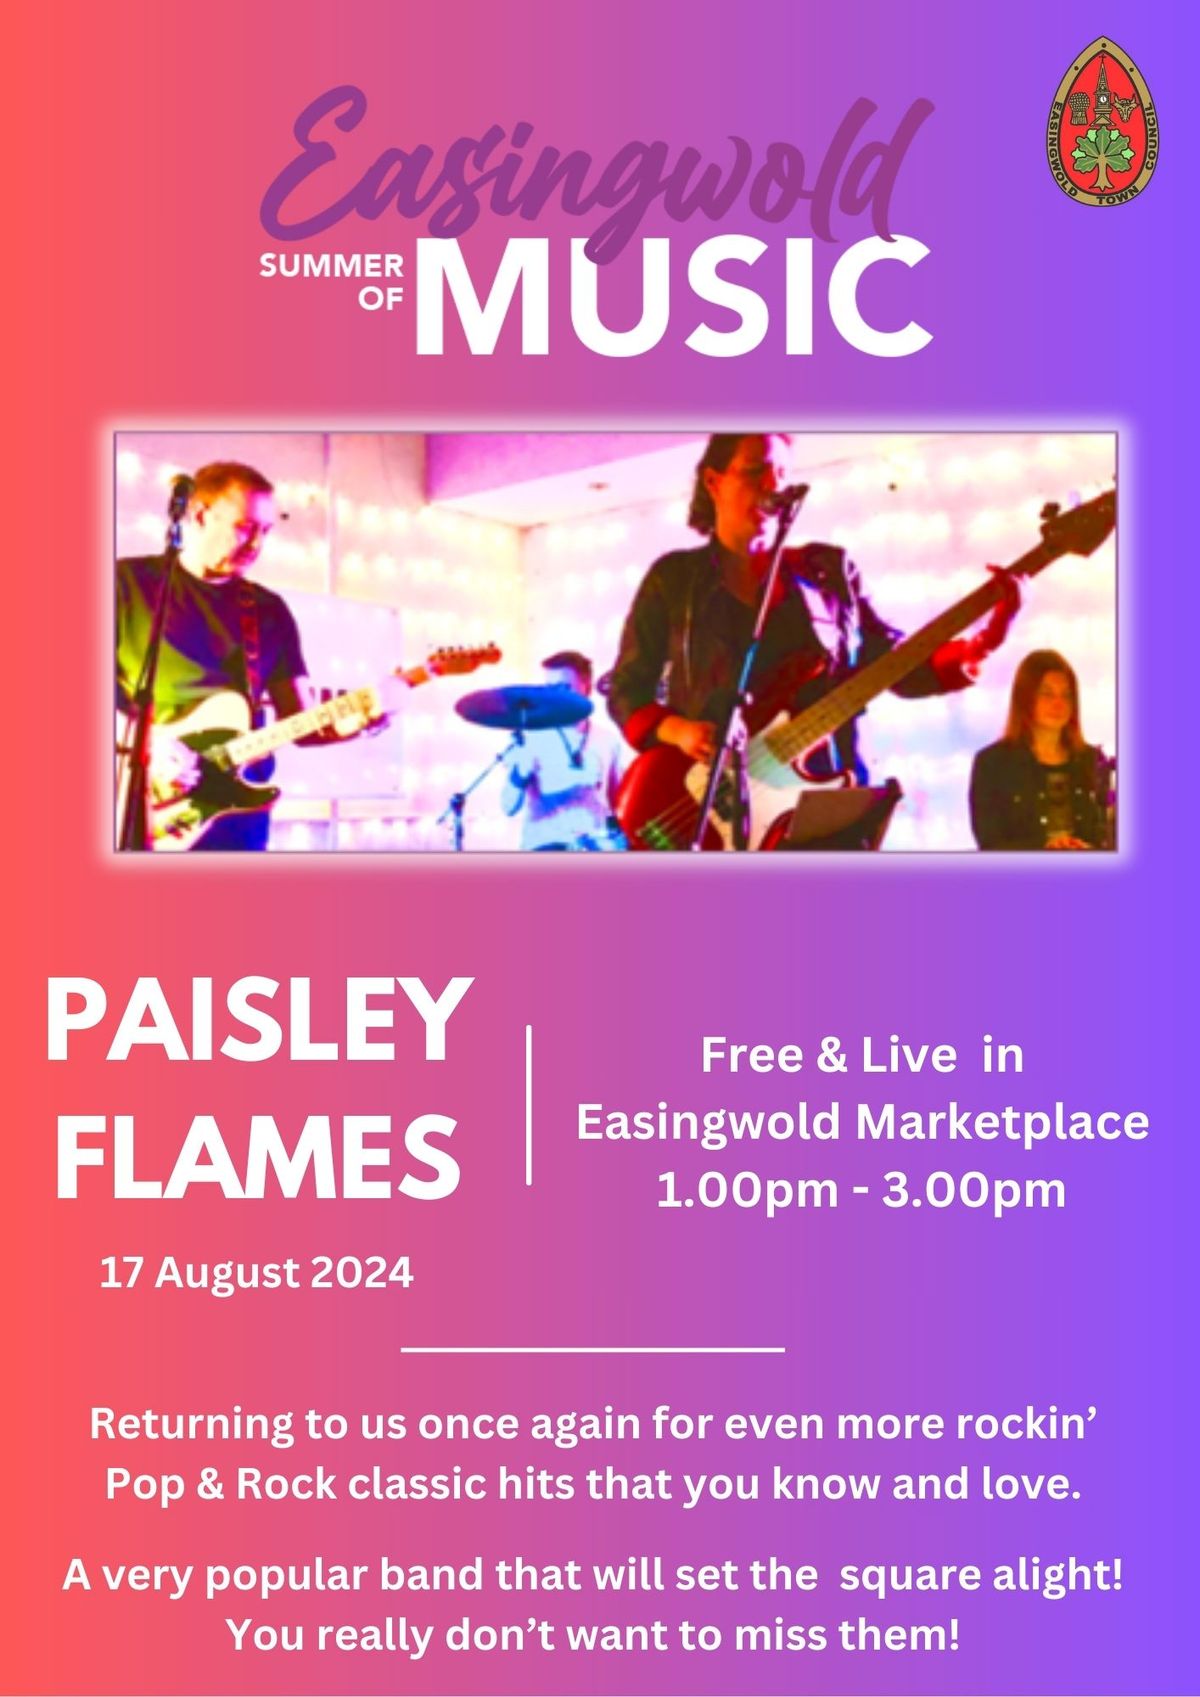 Easingwold Summer of Music - Paisley Flames